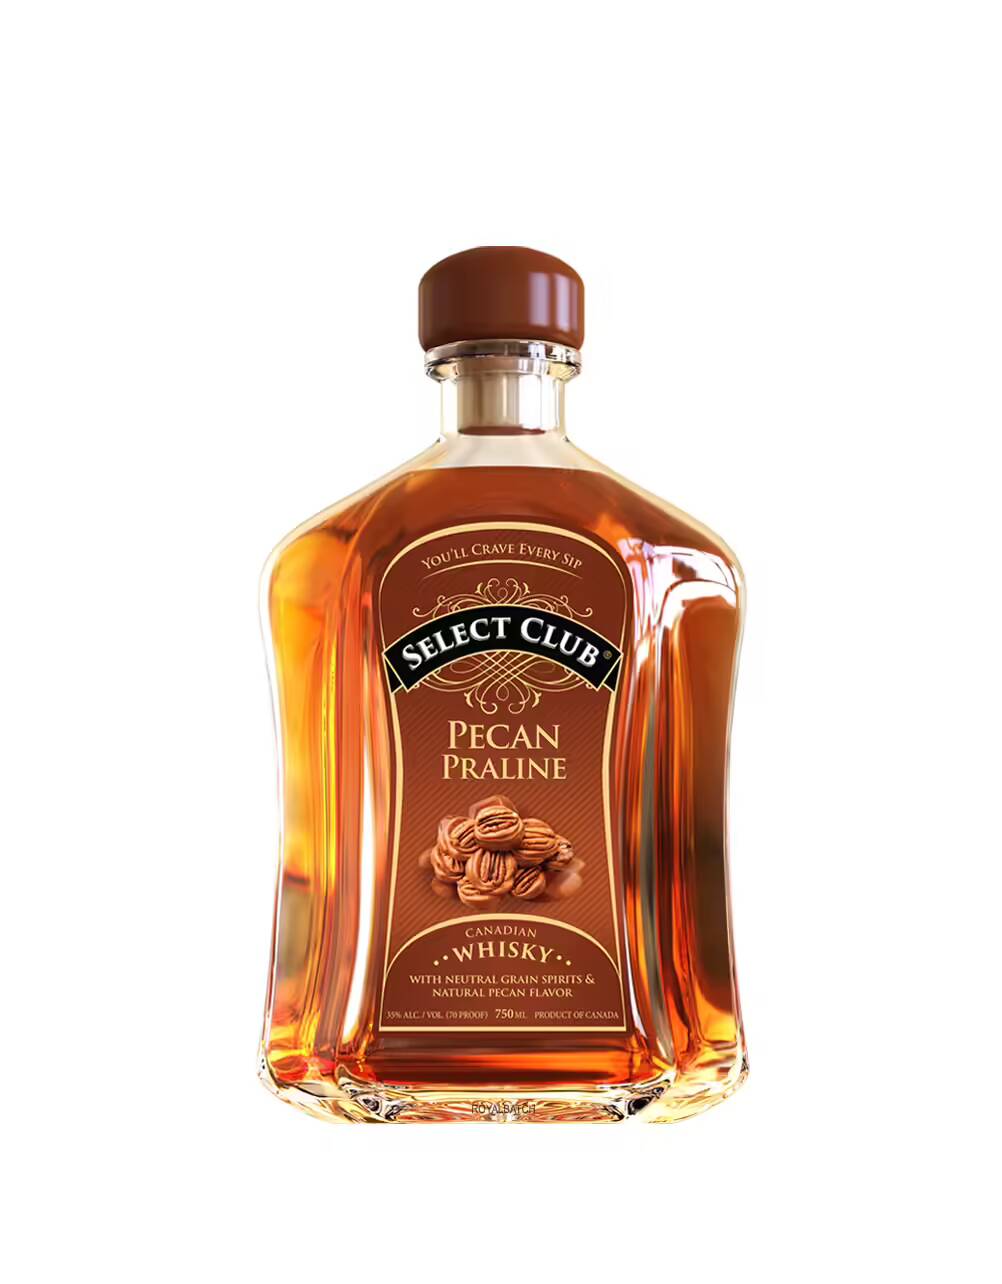 Select Club Pecan Praline Flavored Whisky